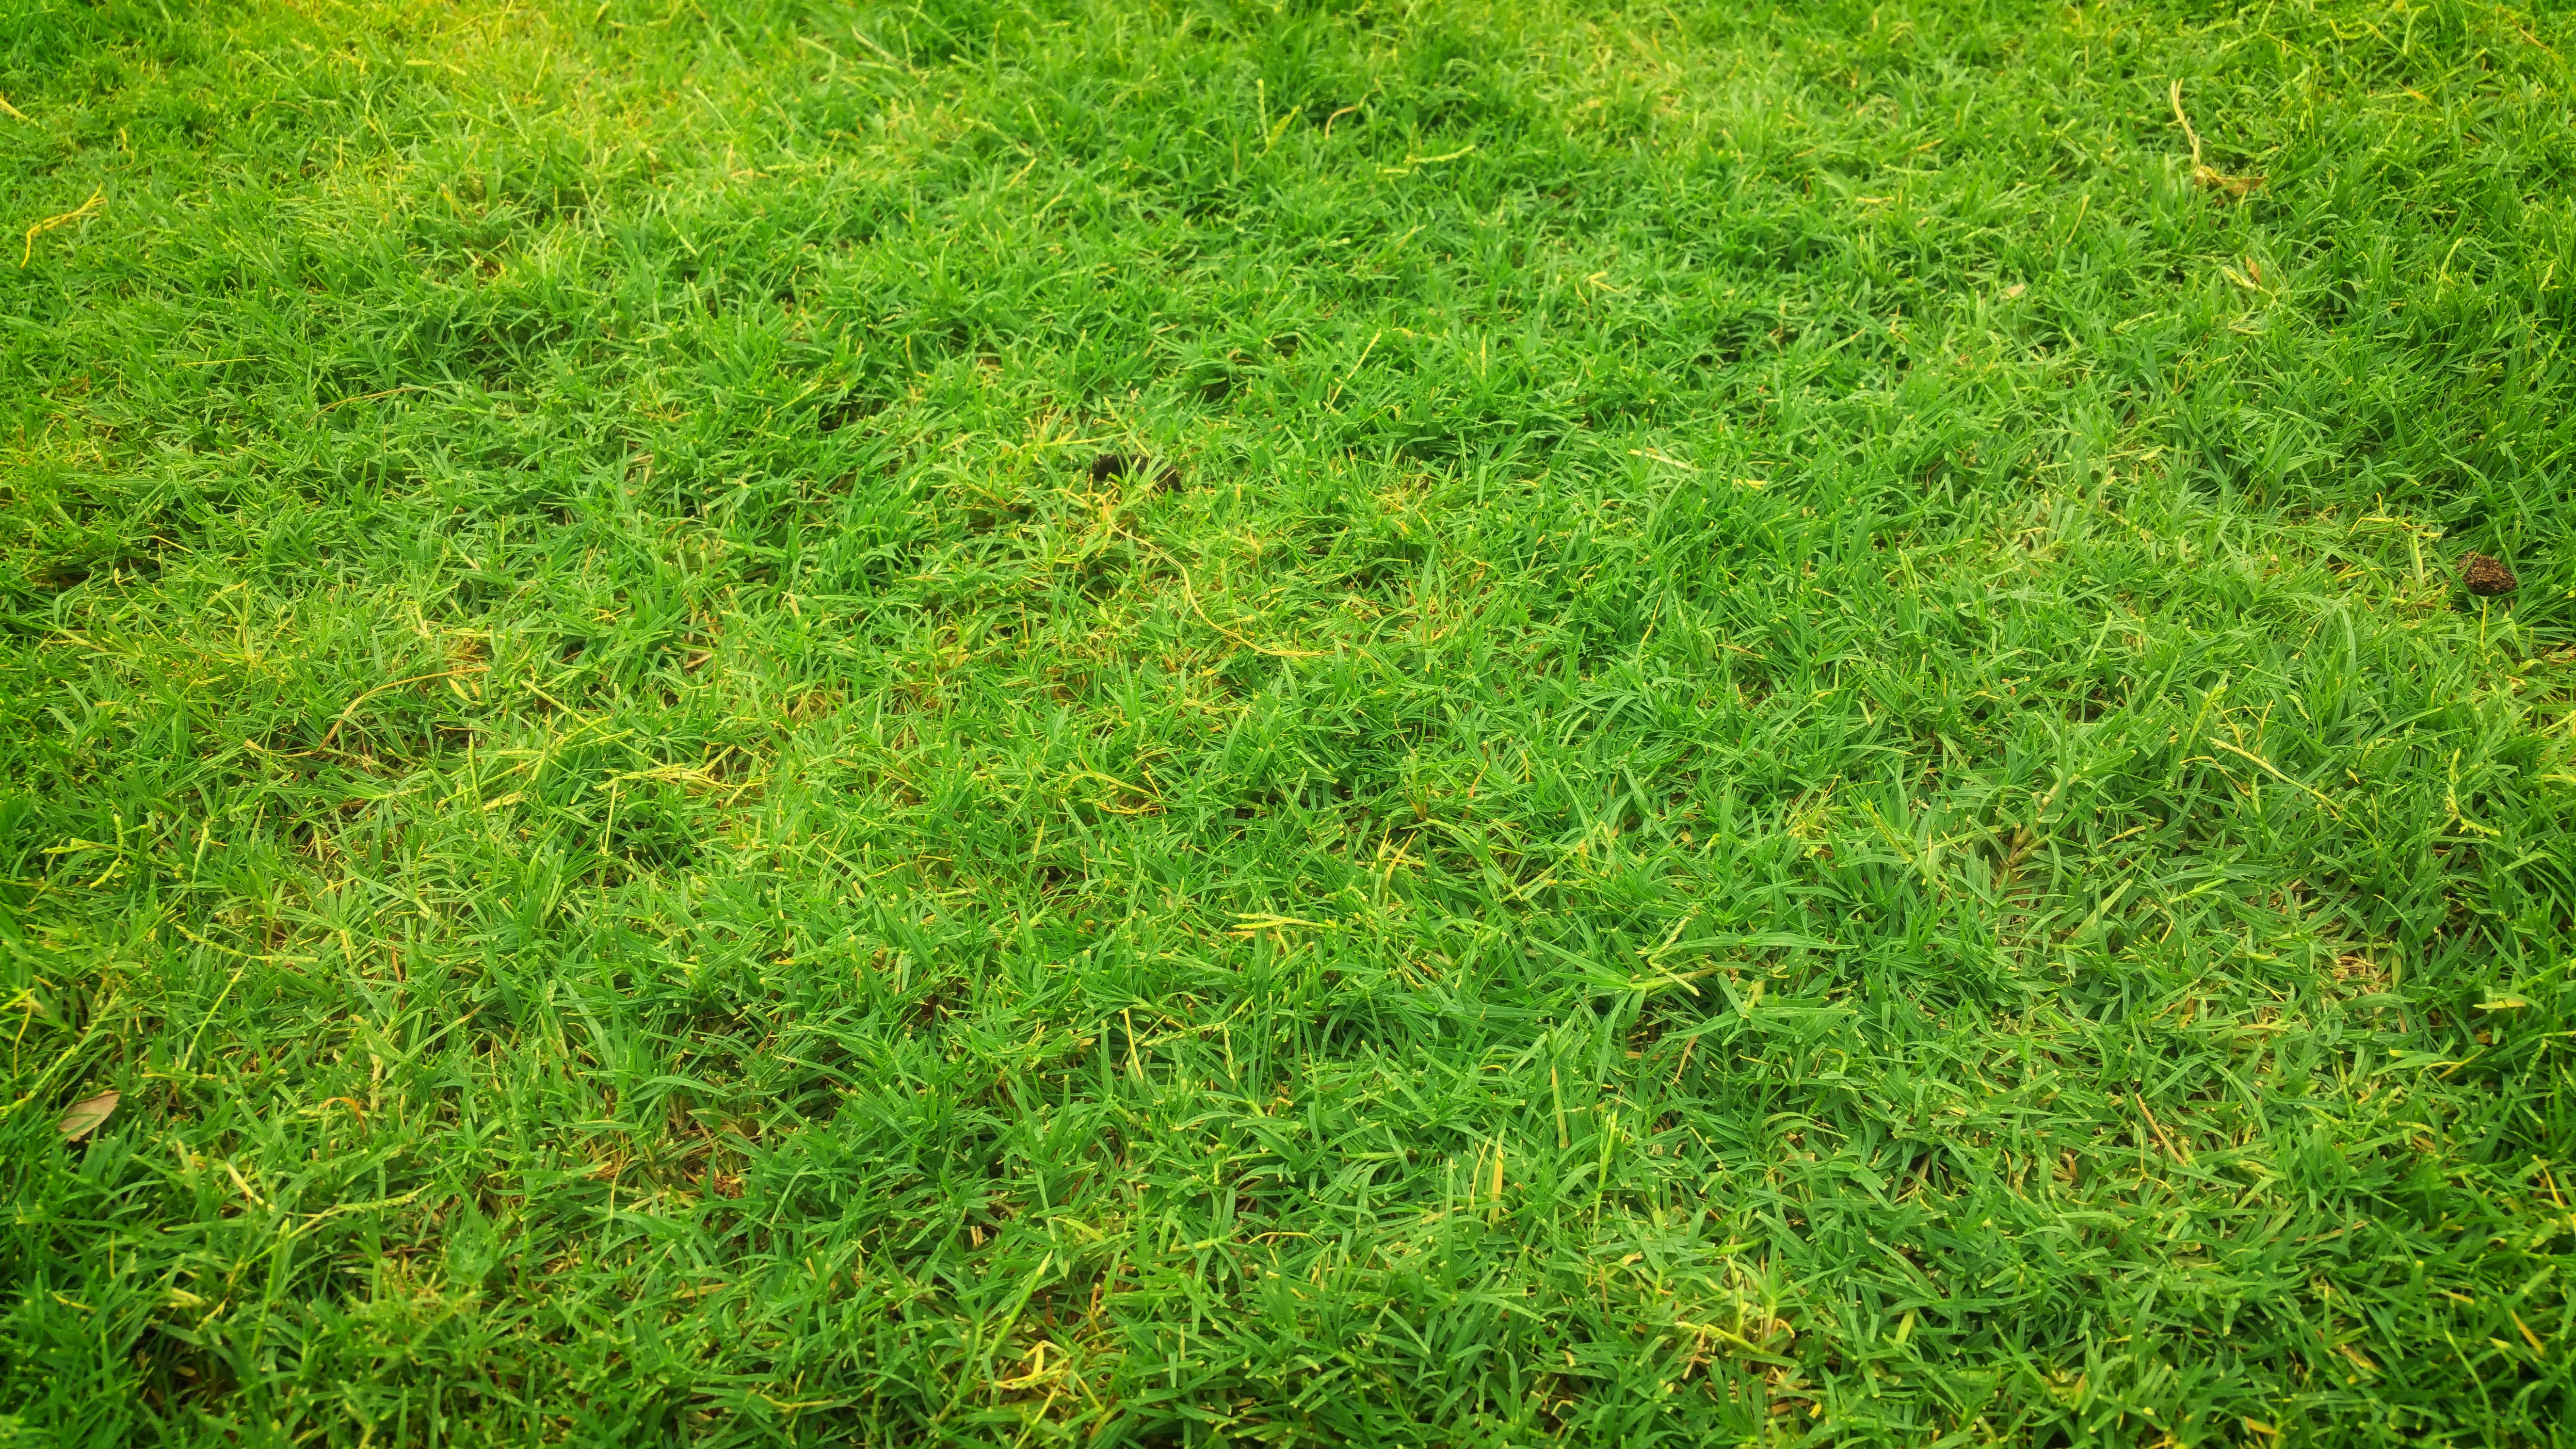 Download Grass wallpapers for mobile phone free Grass HD pictures